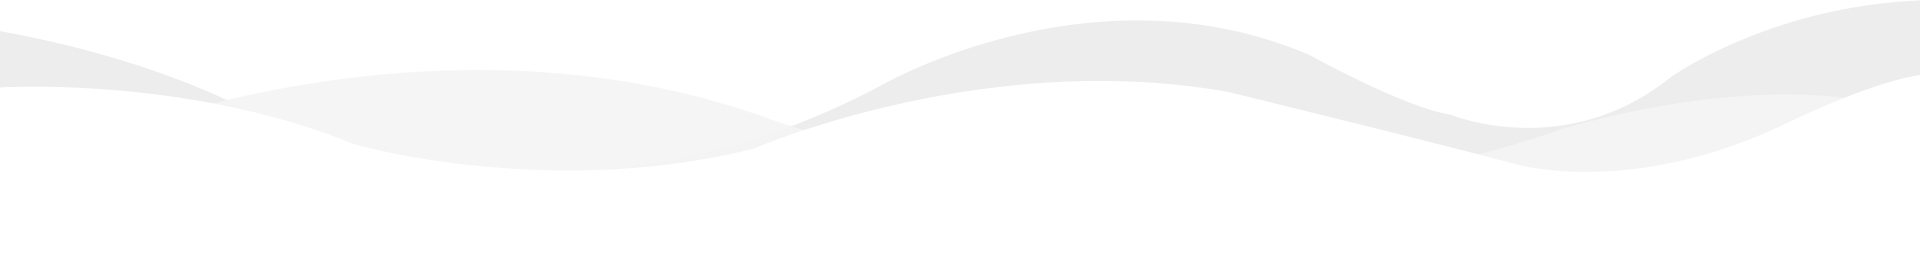 A white oval with black background